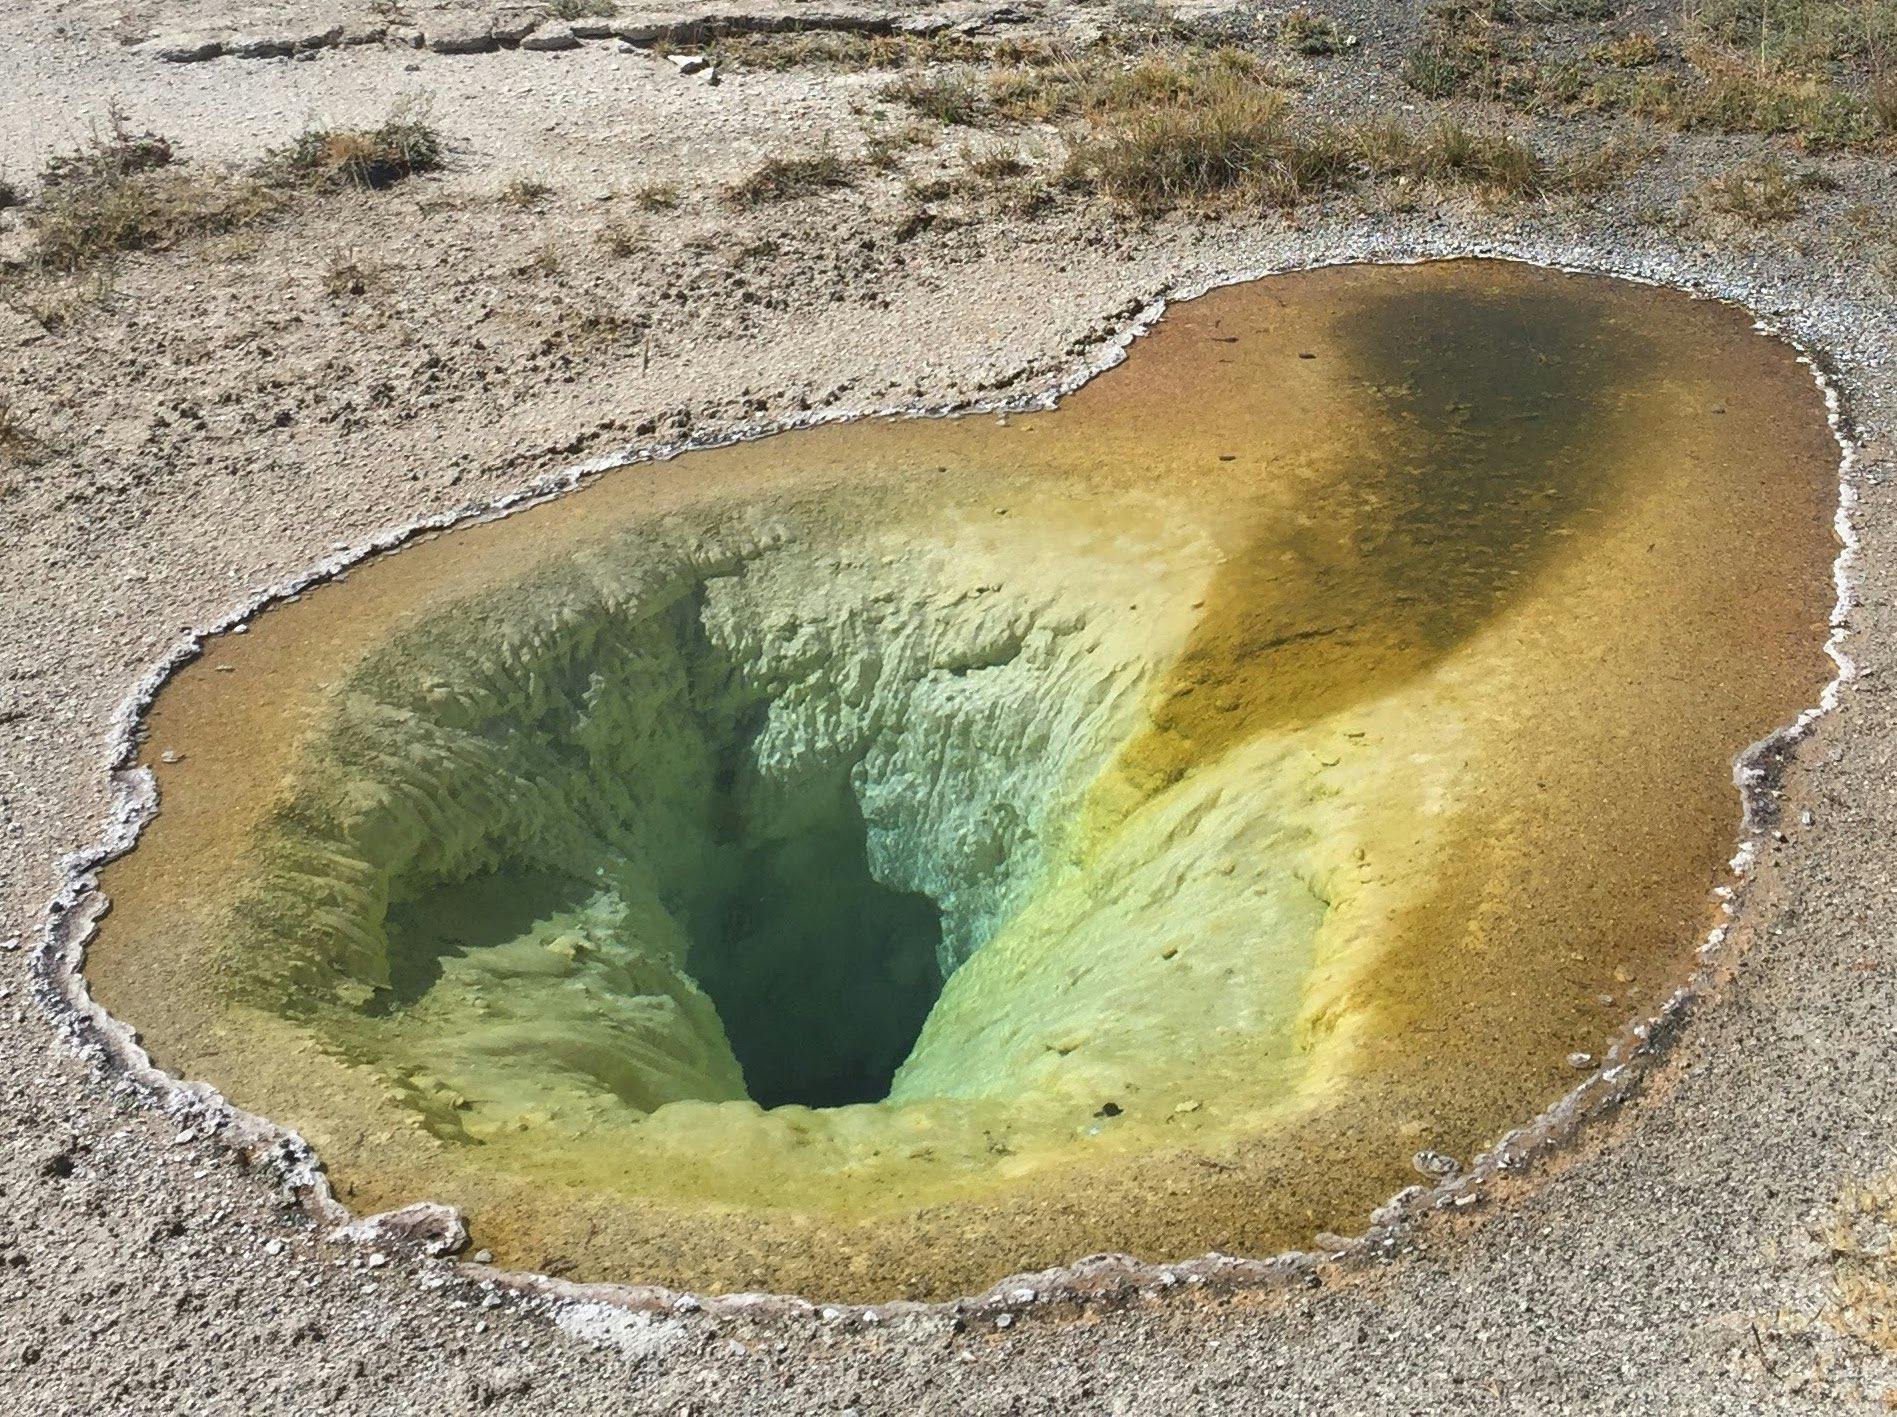 Ear shaped pool in Yellowstone National Park